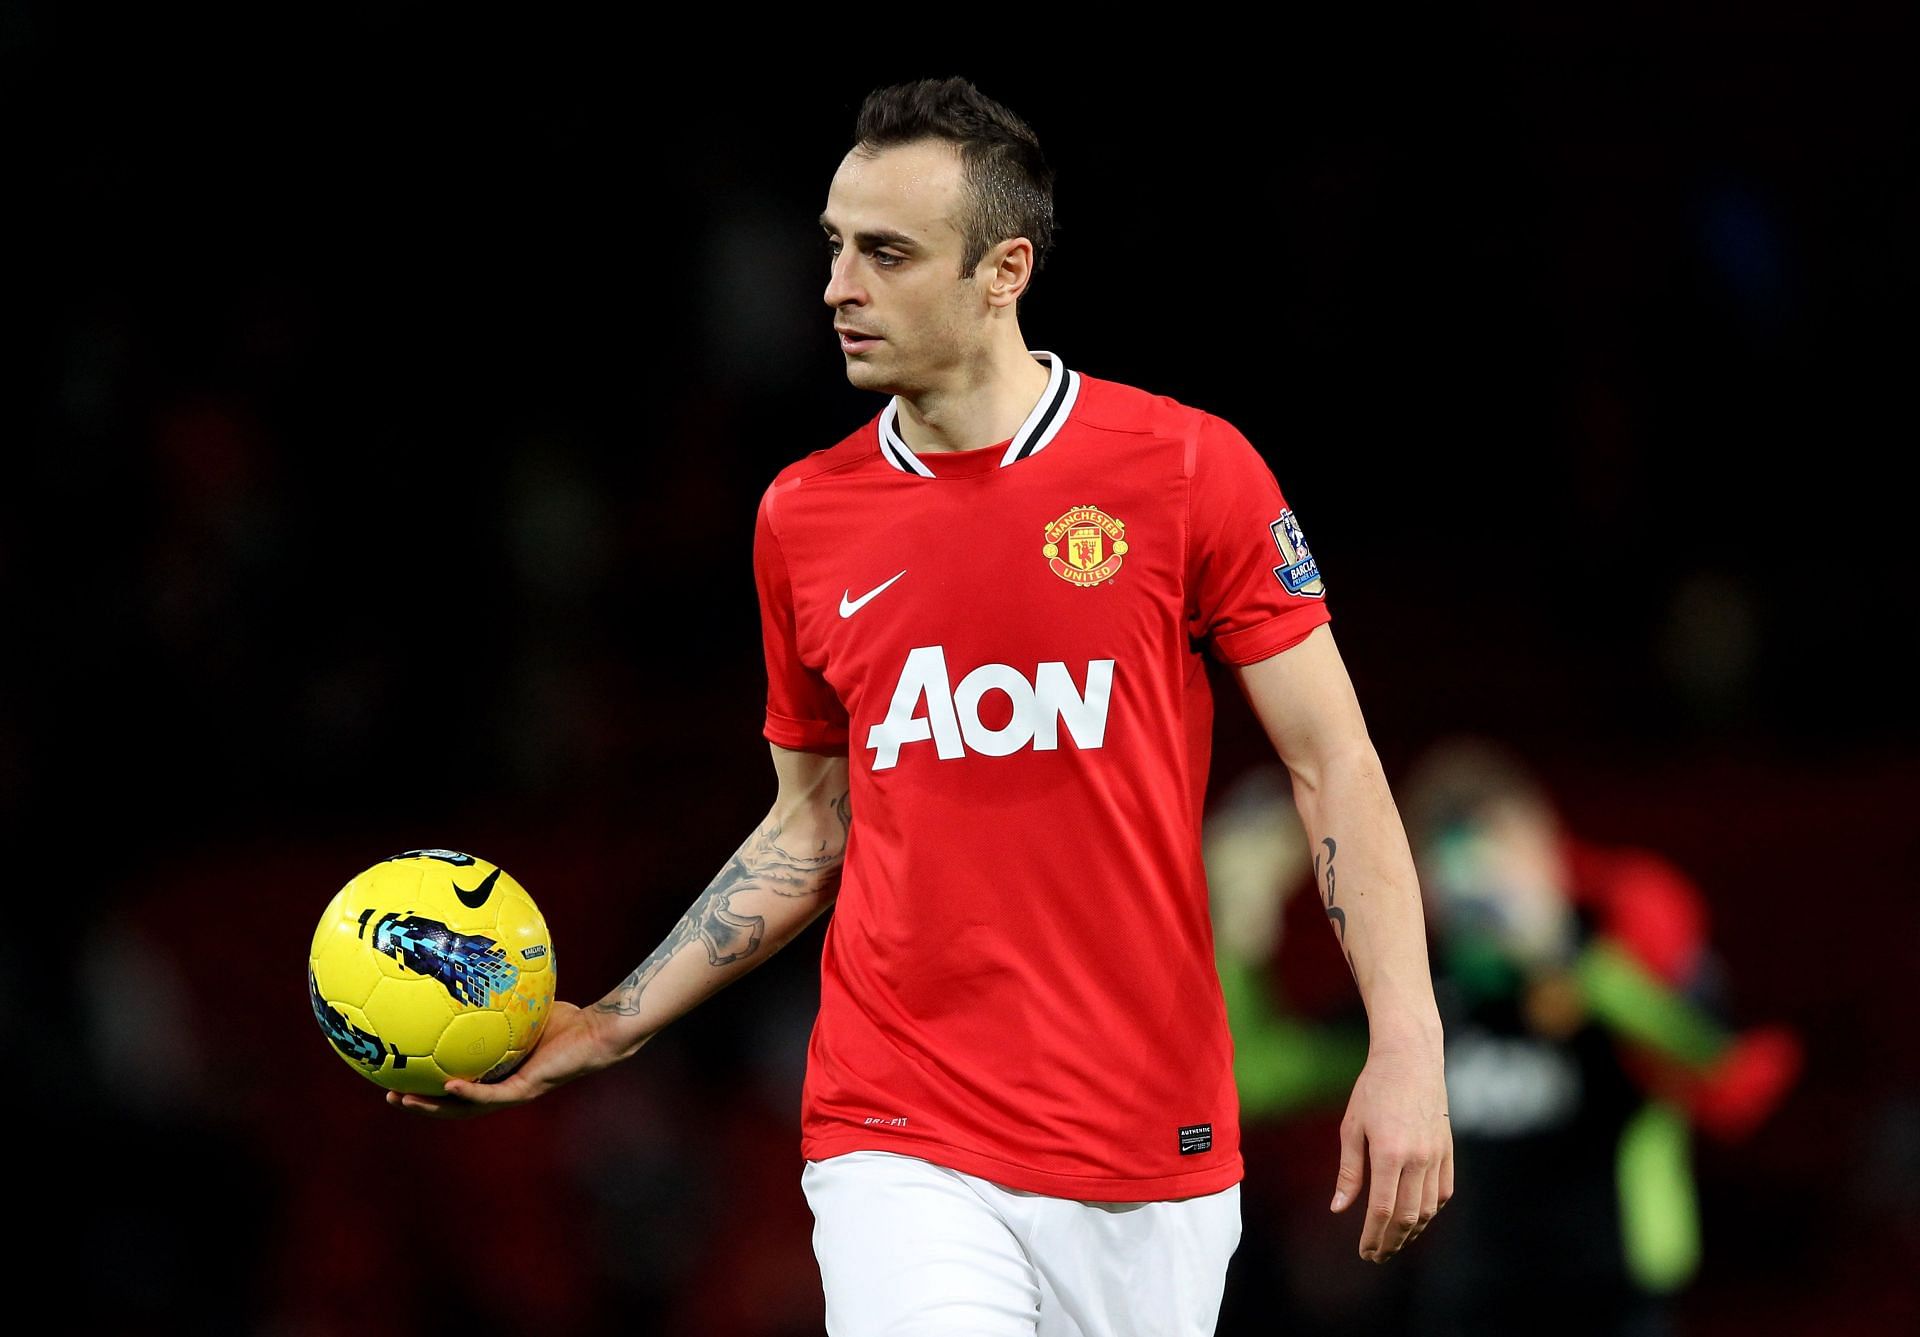 Dimitar Berbatov made 149 appearances for the Red Devils